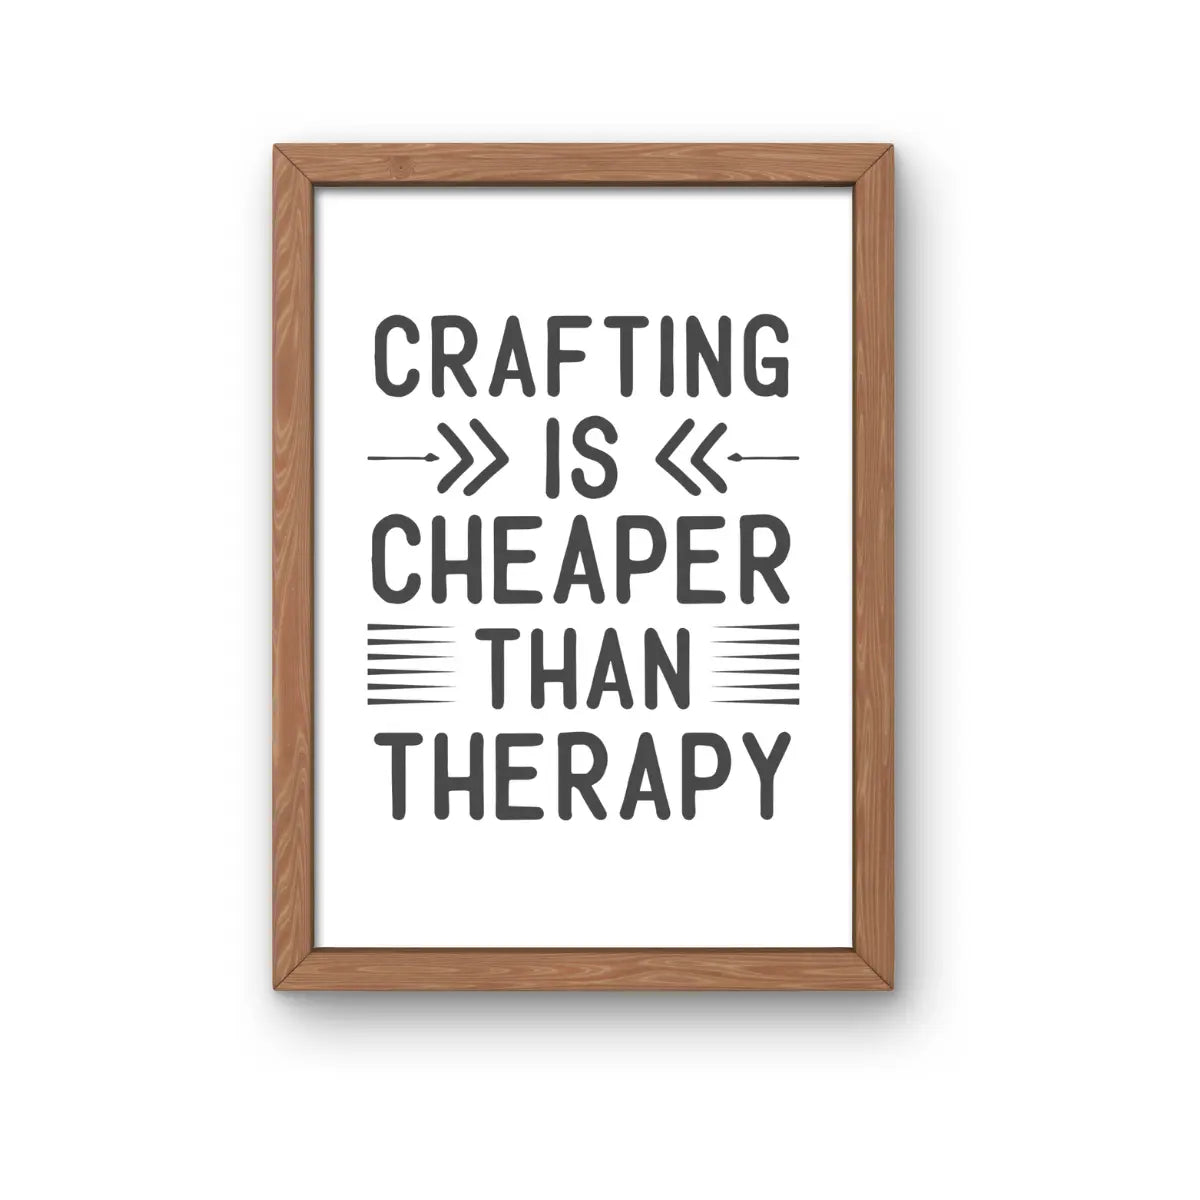 Crafting is cheaper than therapy SVG | Digital Download | Cut File | SVG Only The Sweet Stuff